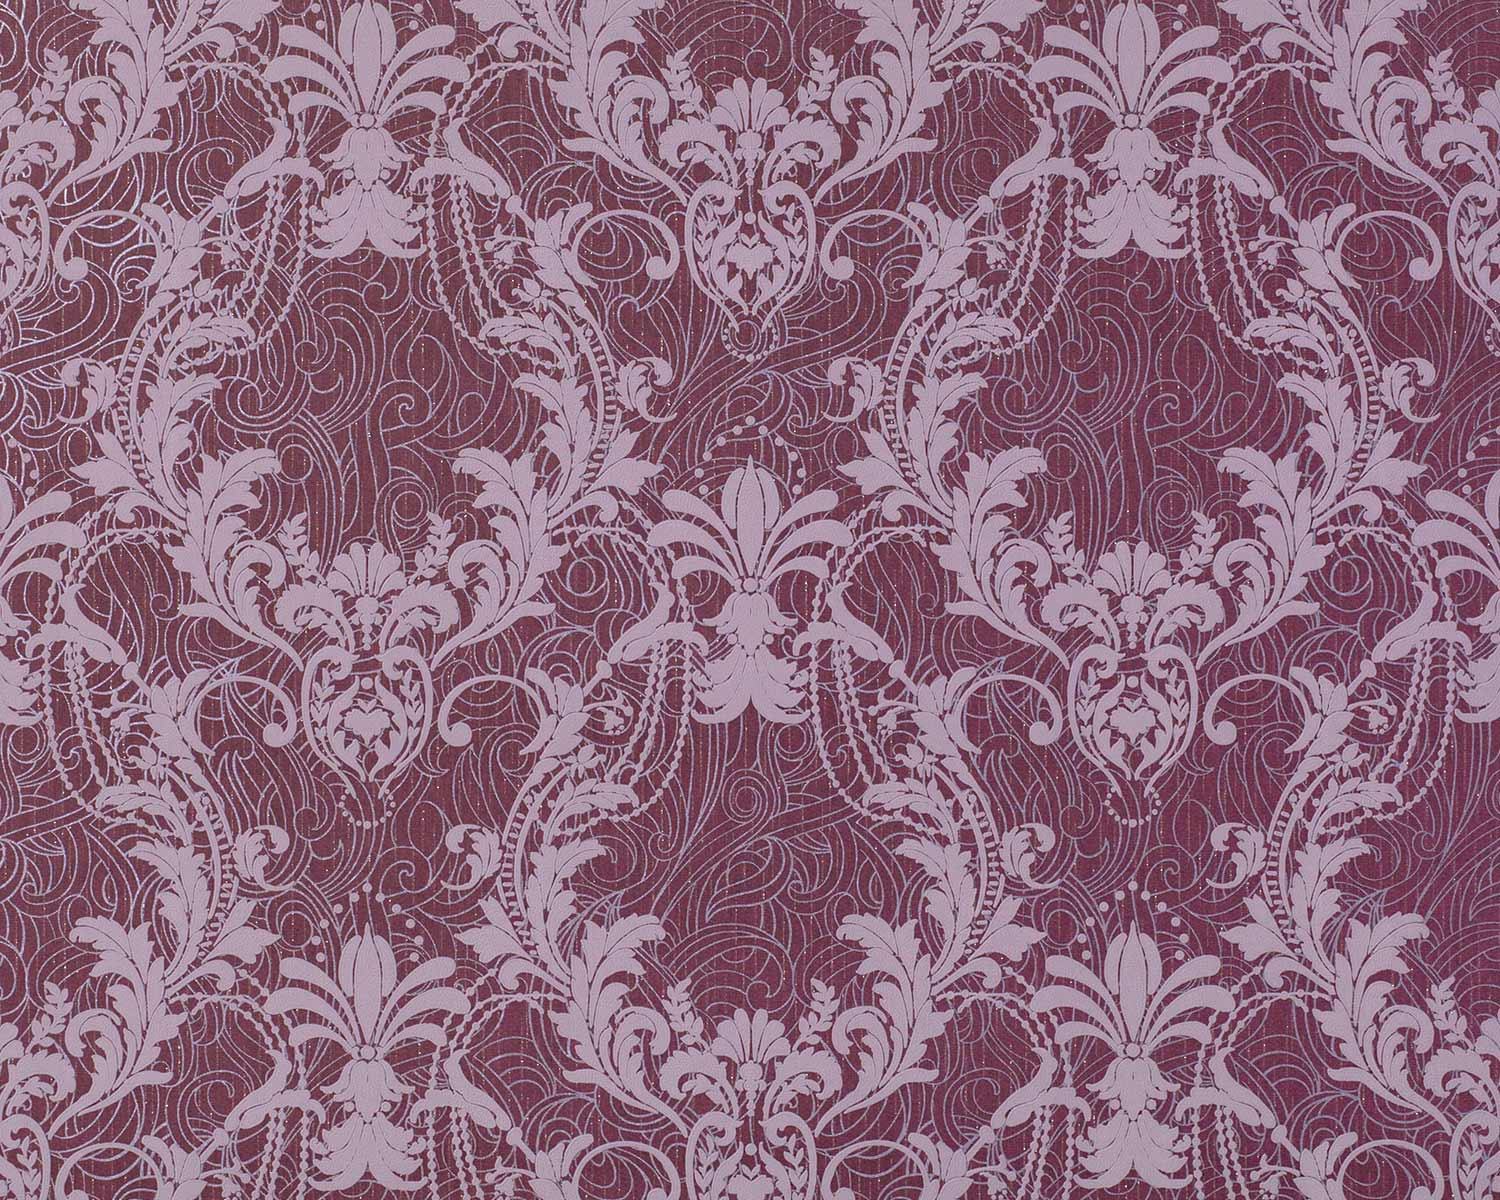 Edem Imperial Baroque Textured Non Woven Wallpaper Damask Pattern